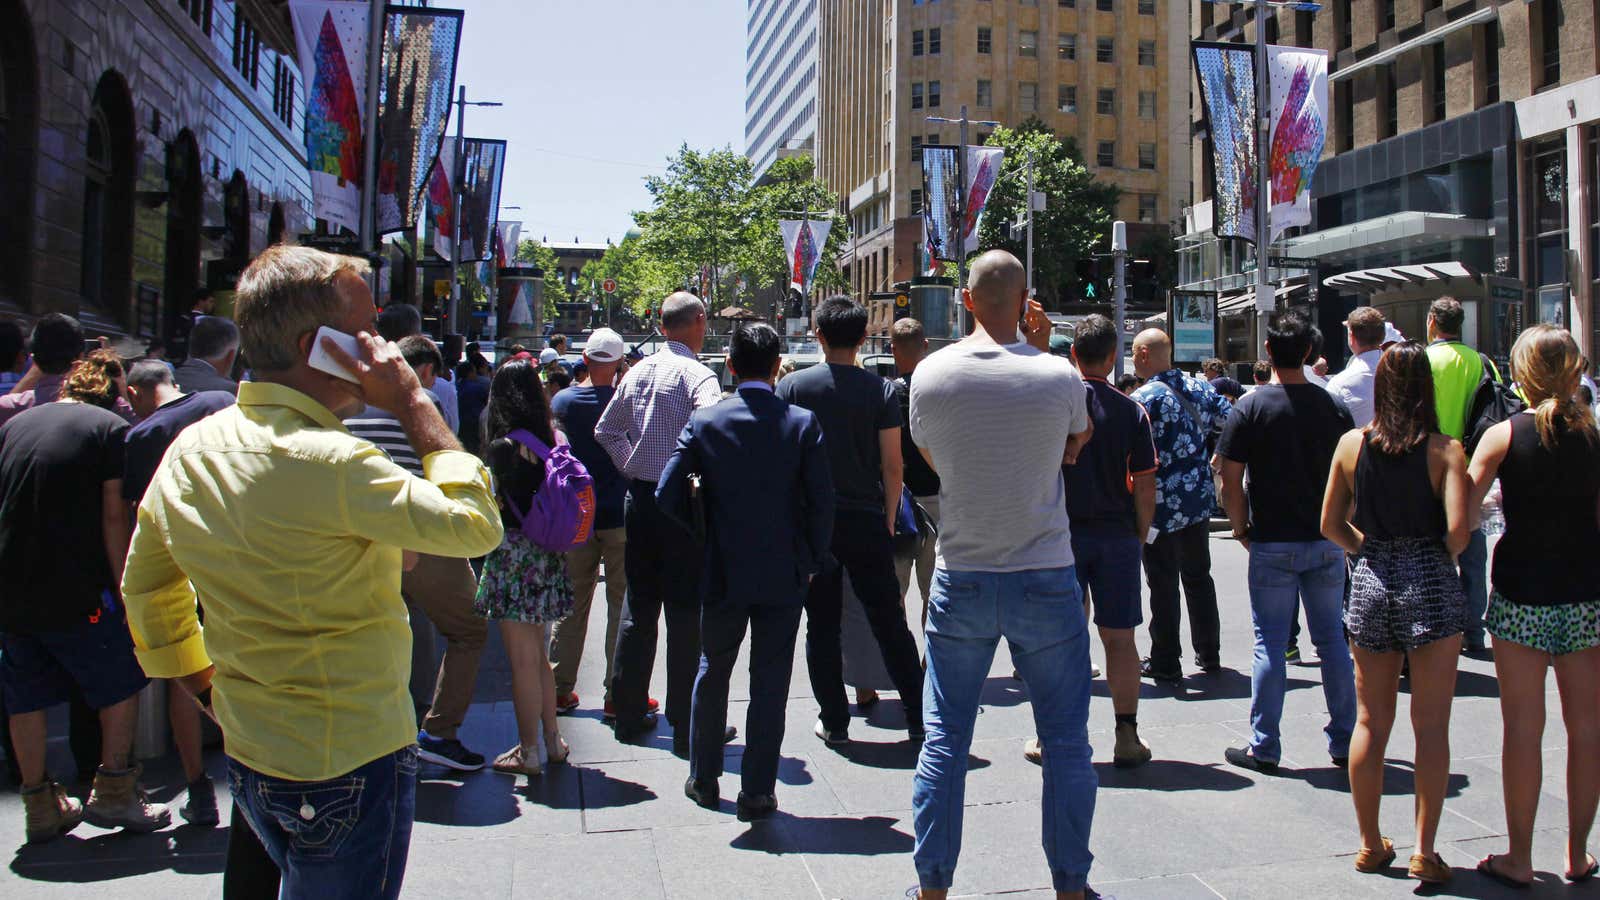 Bystanders outside Martin Place as the hostage crisis unfolded Dec. 15.